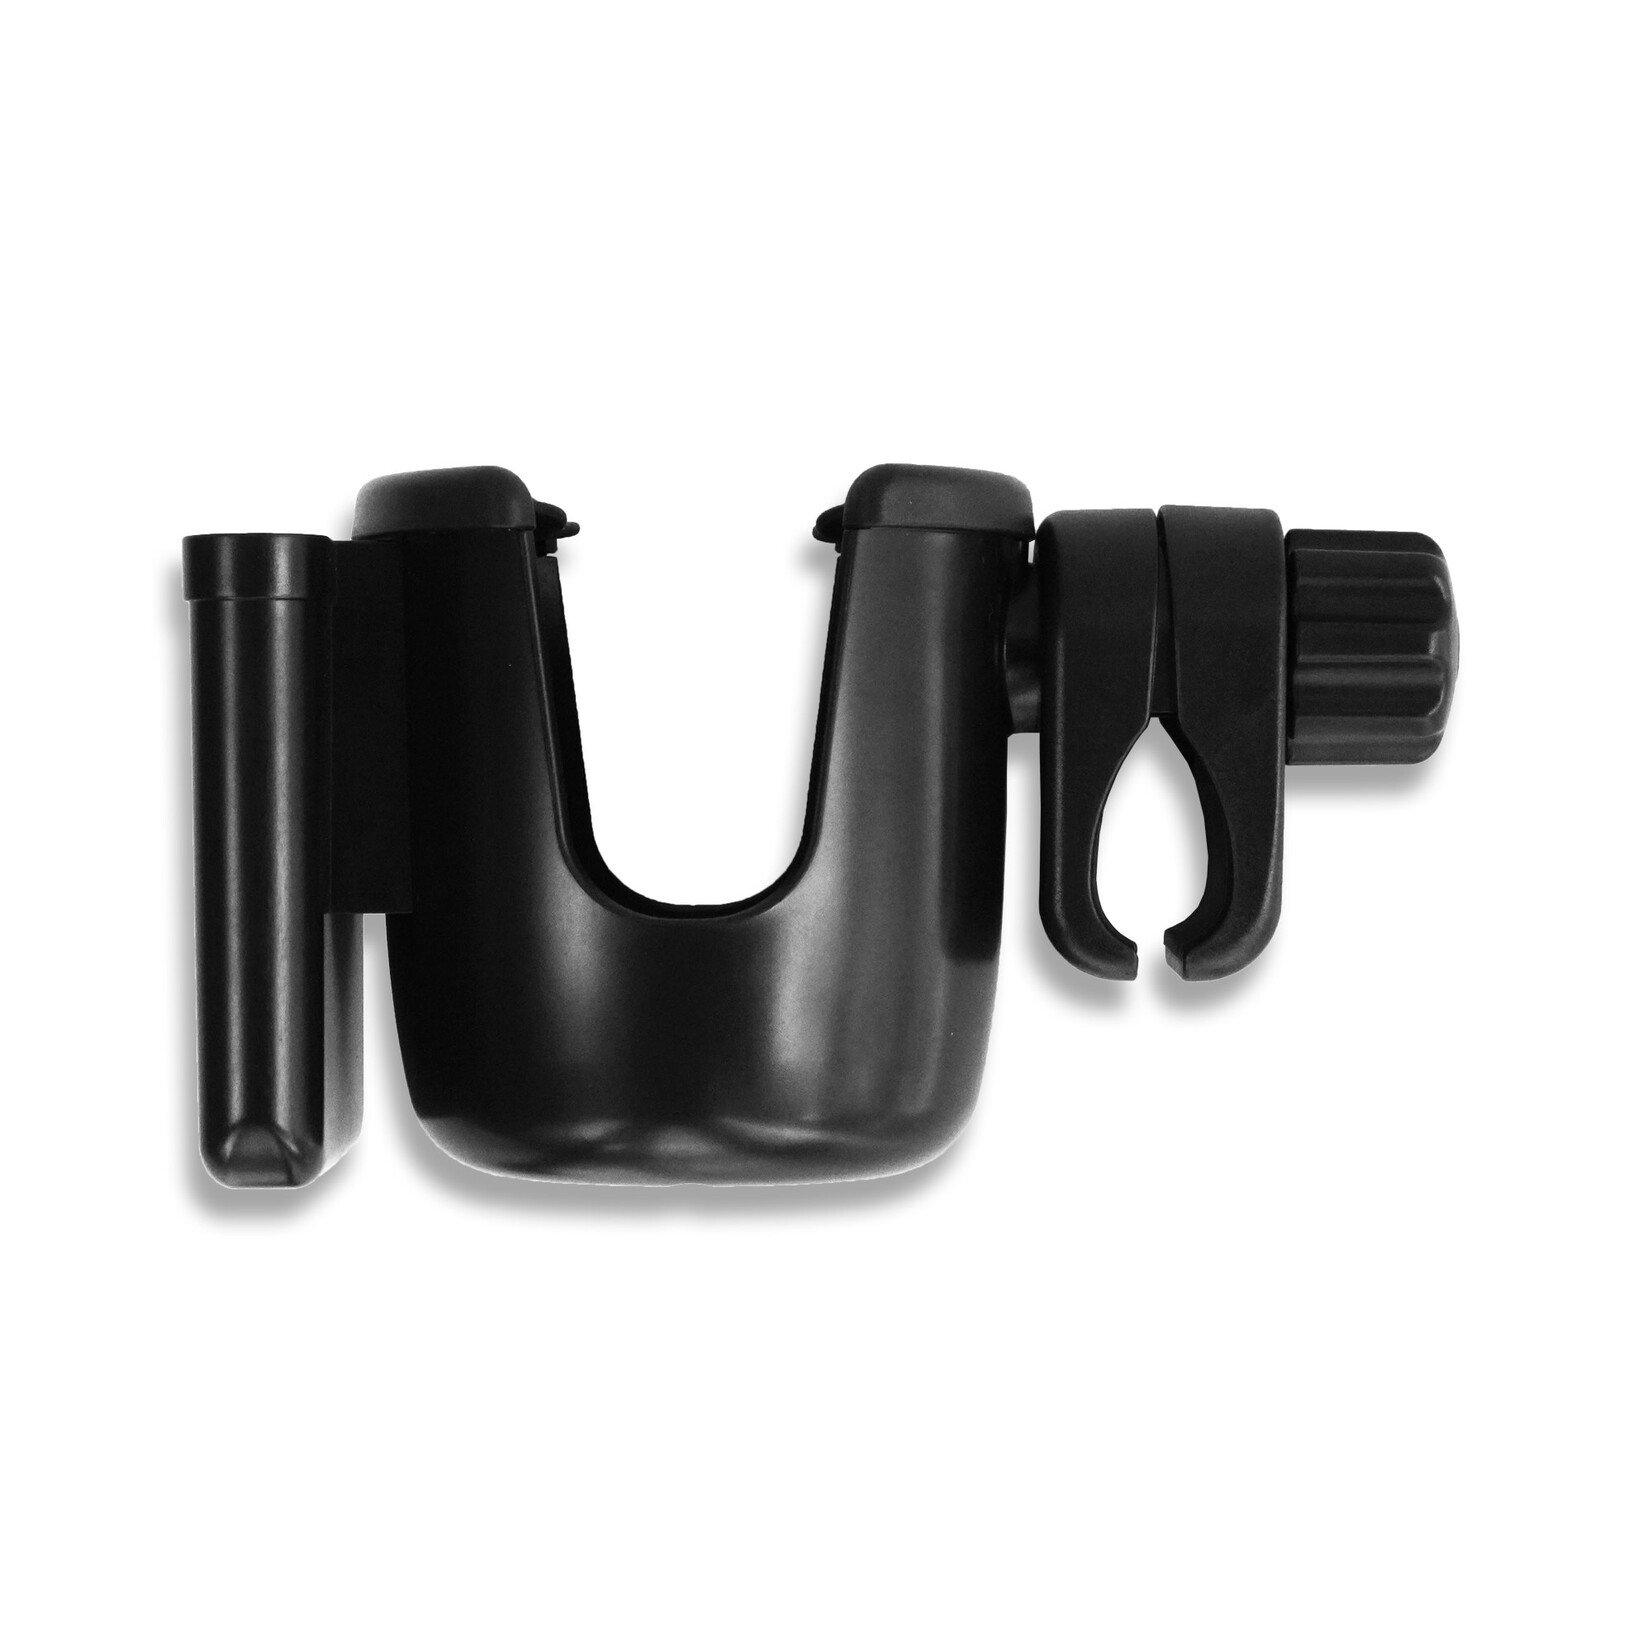 Wonderfold 2 in 1 Cup & Phone Holder (fits all wagons)